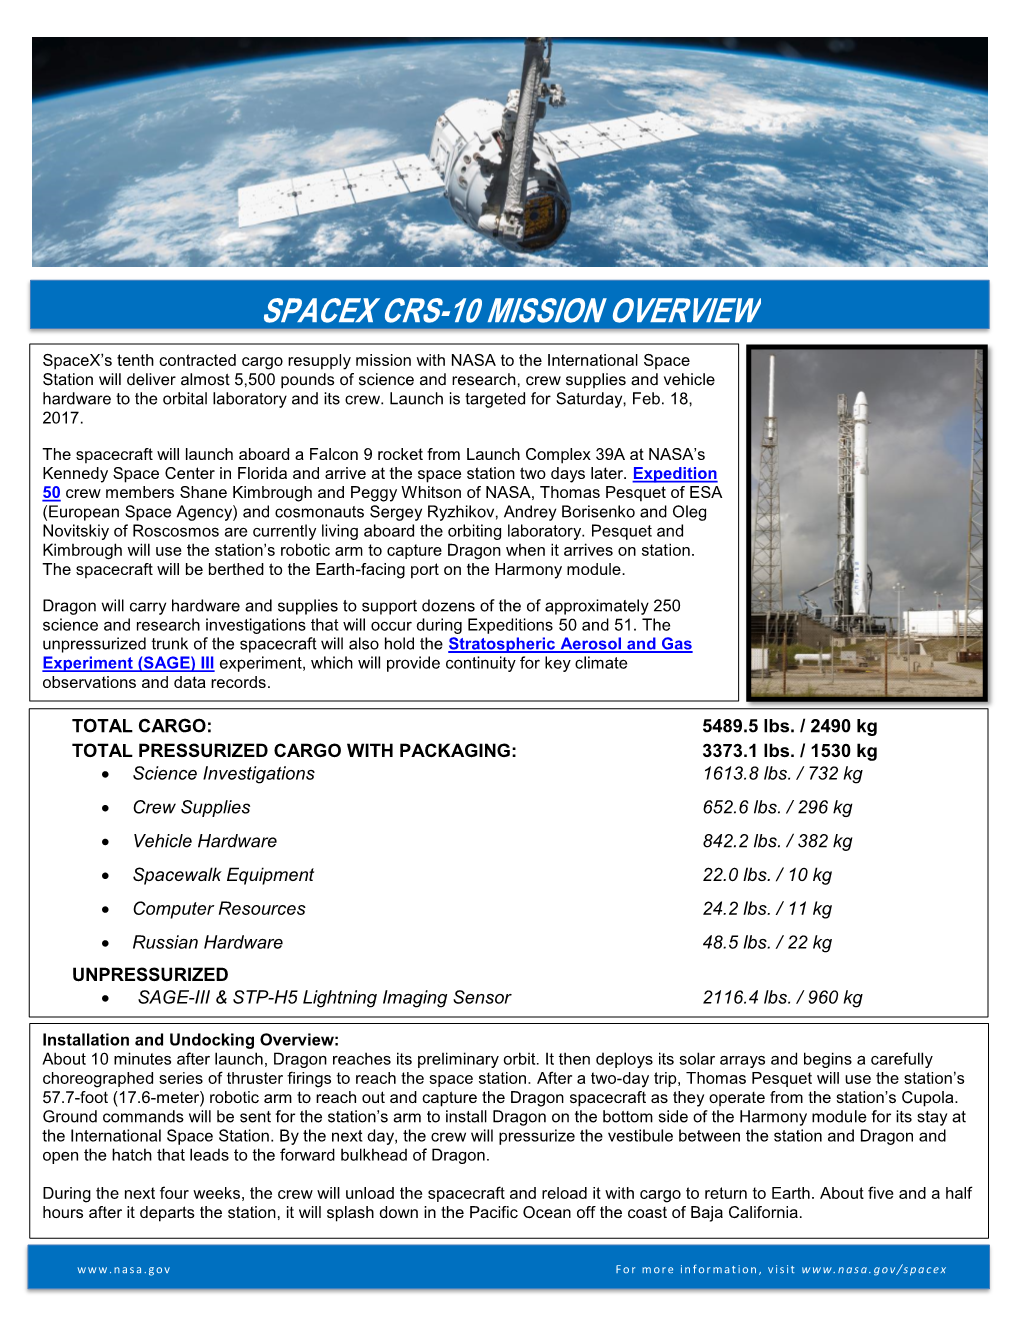 Spacex Crs-10 Mission Overview